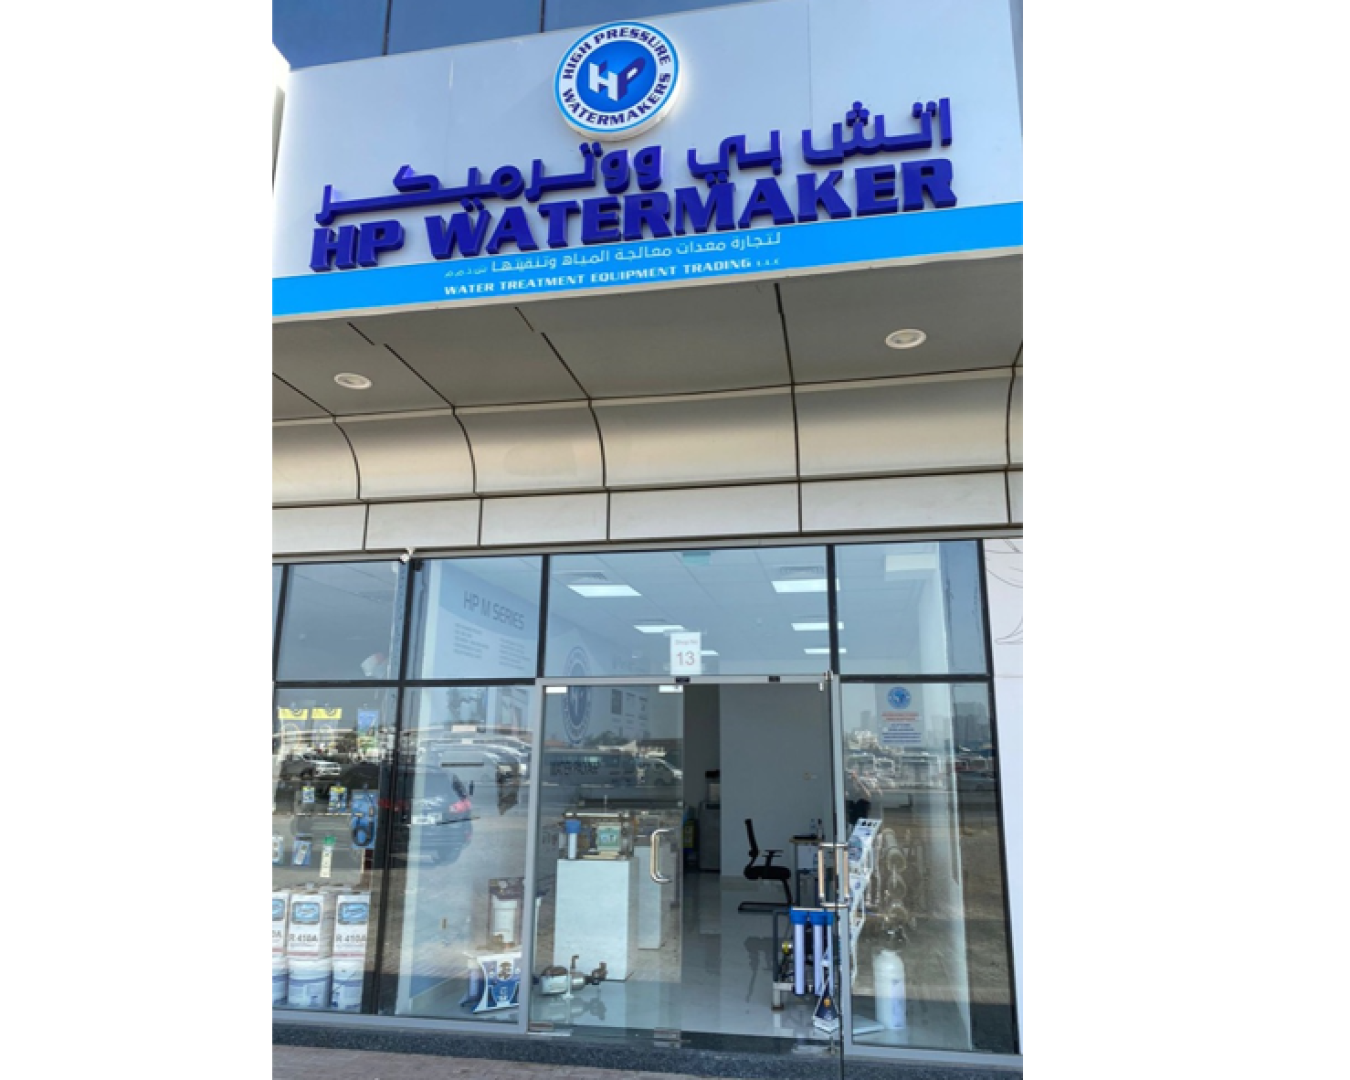 HP Watermakers races into 2022 with strong sales, new products